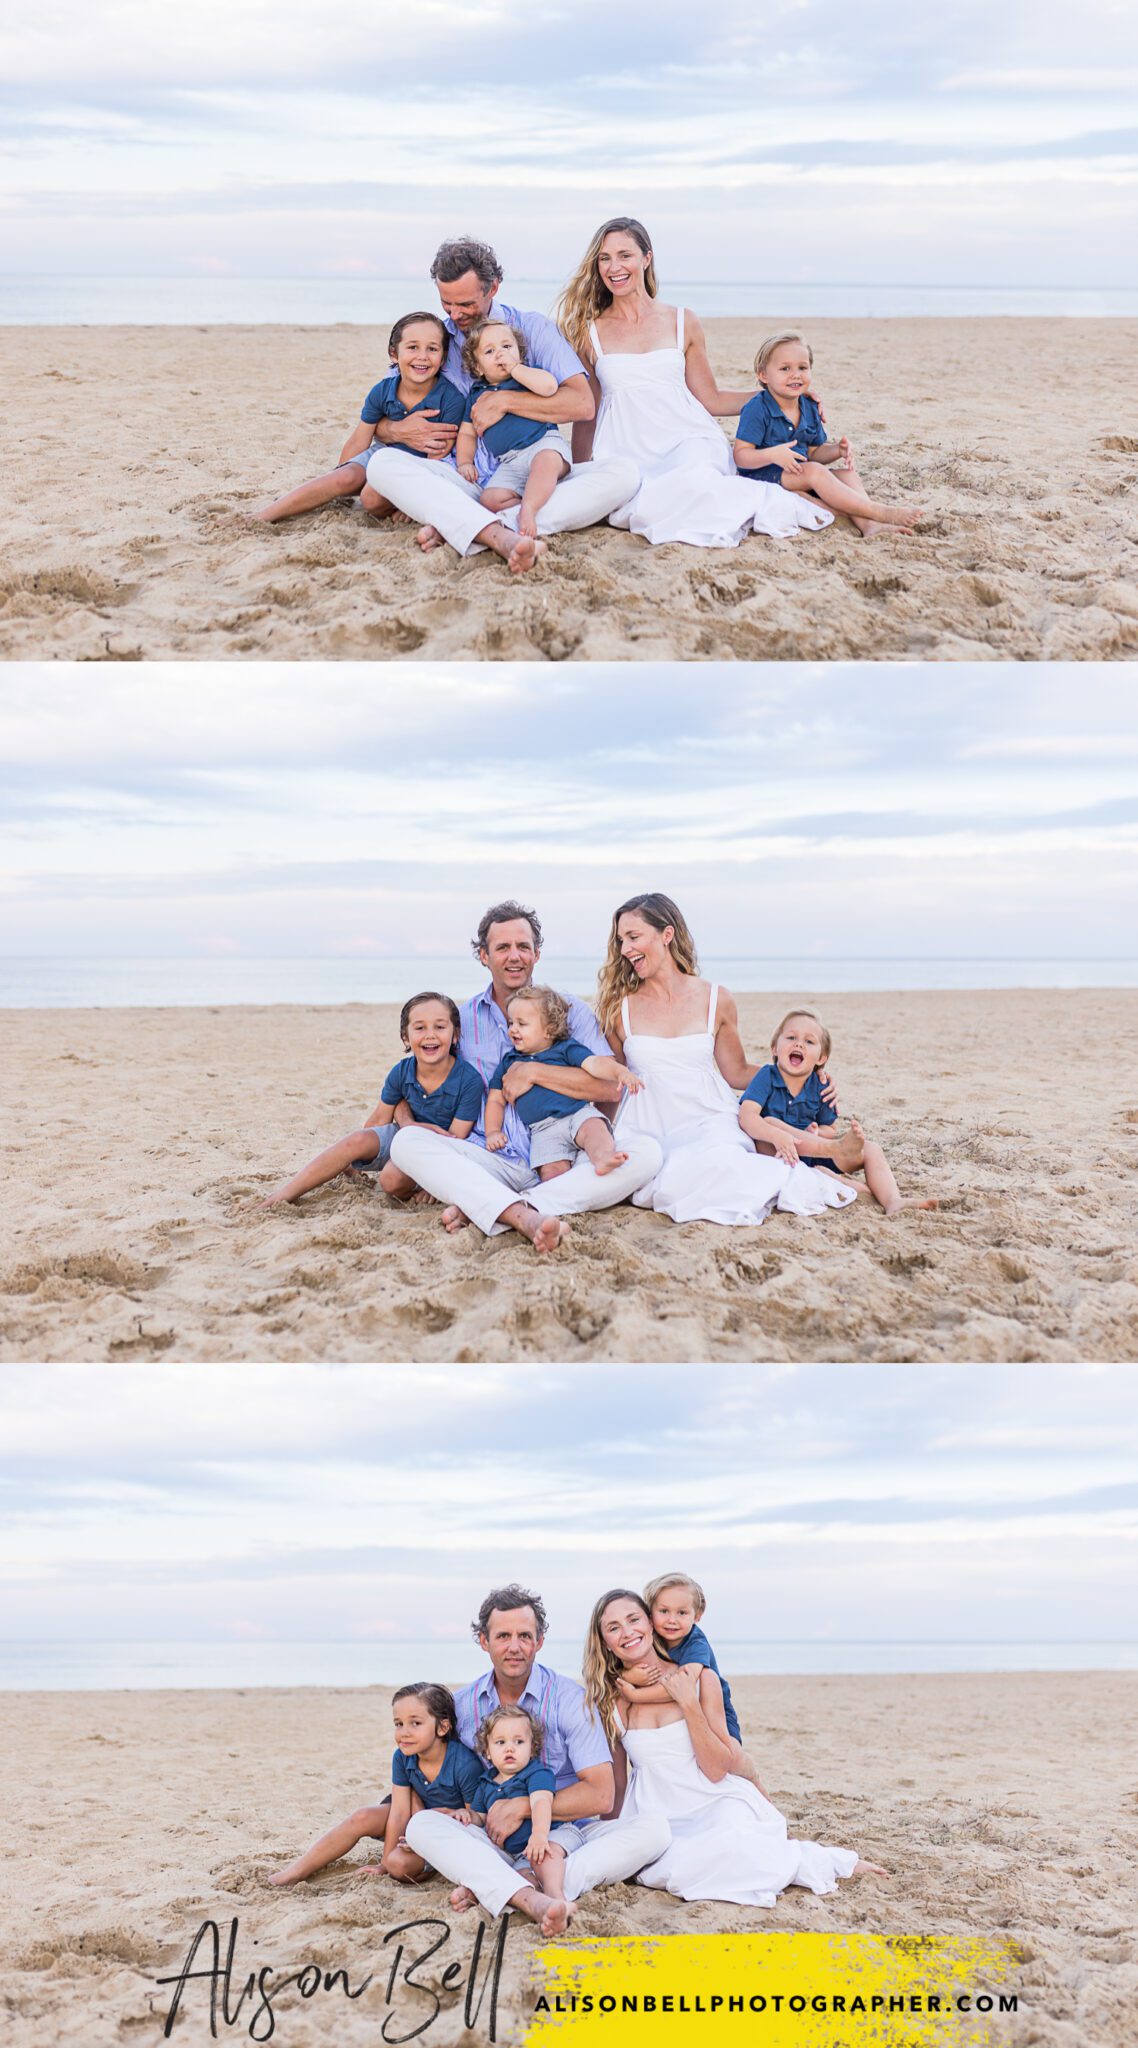 North End Beach Family Photographer, Alison Bell